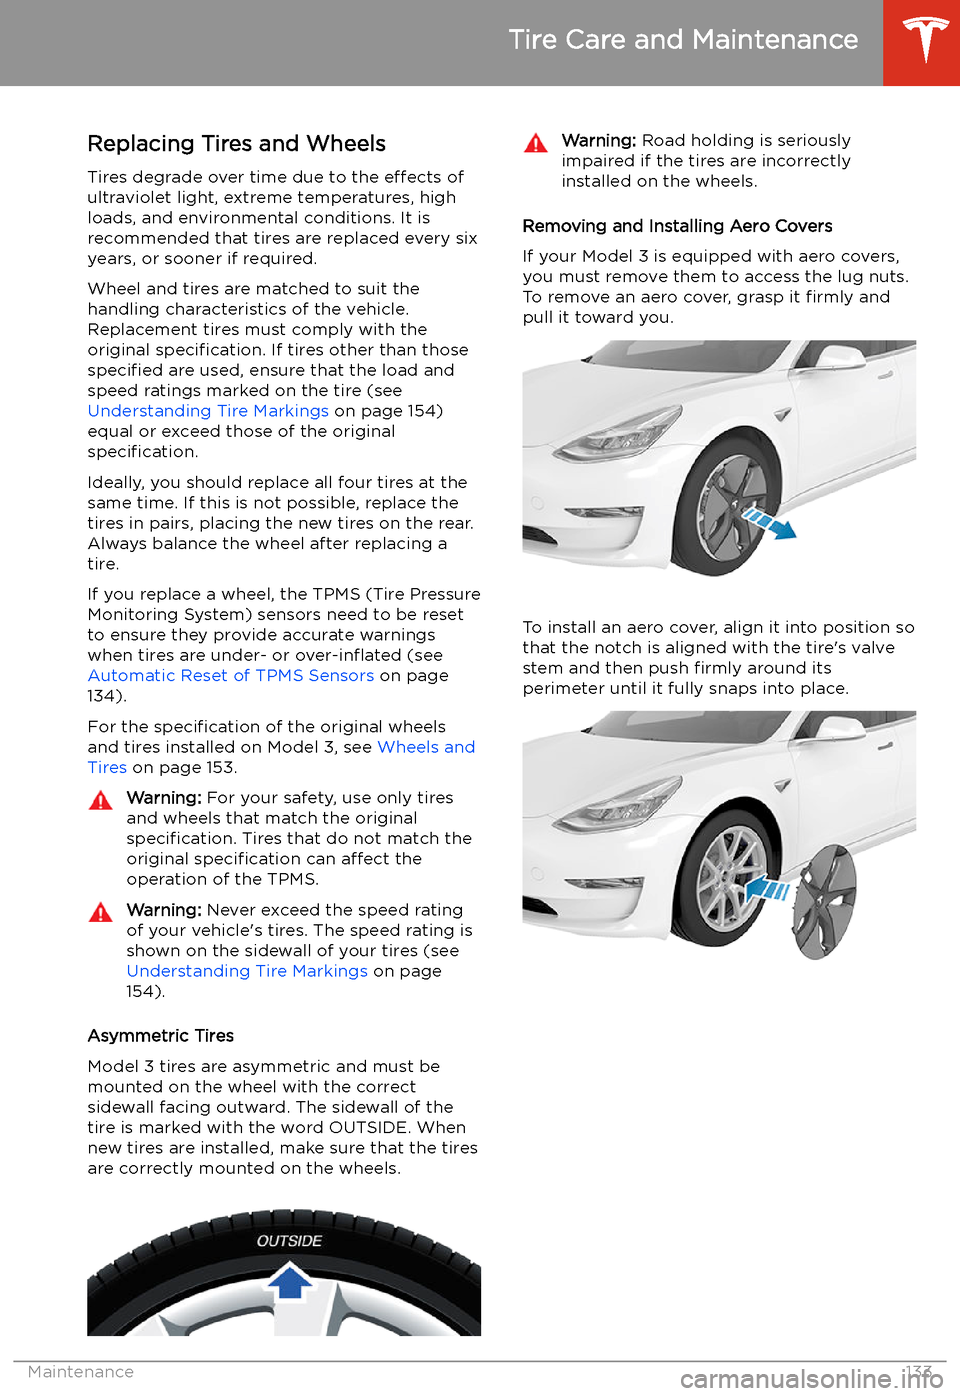 TESLA MODEL 3 2019  Owners Manual (Europe) Replacing Tires and Wheels
Tires degrade over time due to the  effects of
ultraviolet light, extreme temperatures, high
loads, and environmental conditions. It is
recommended that tires are replaced e